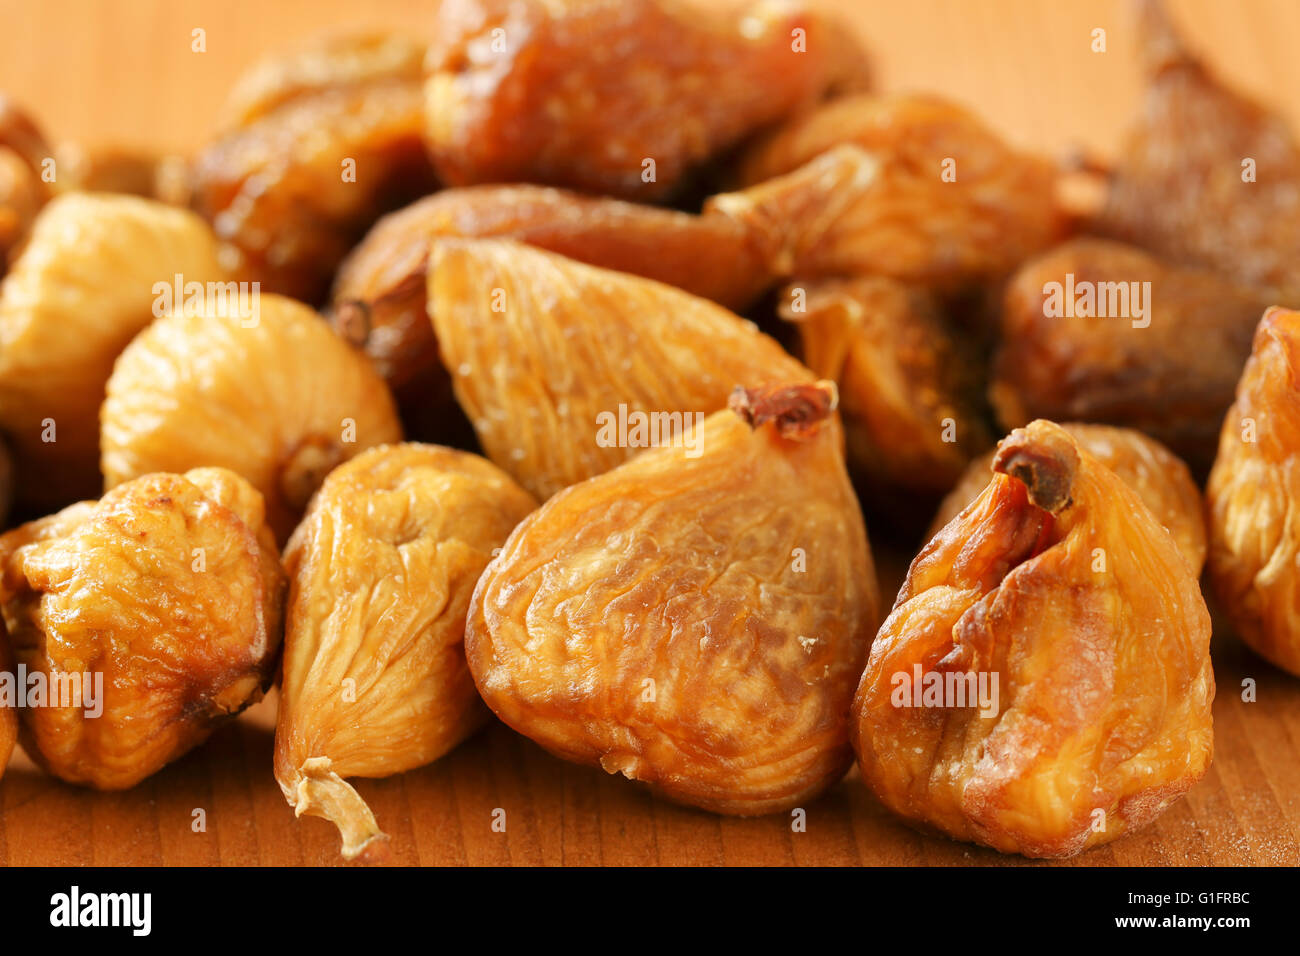 detail of sun dried figs Stock Photo